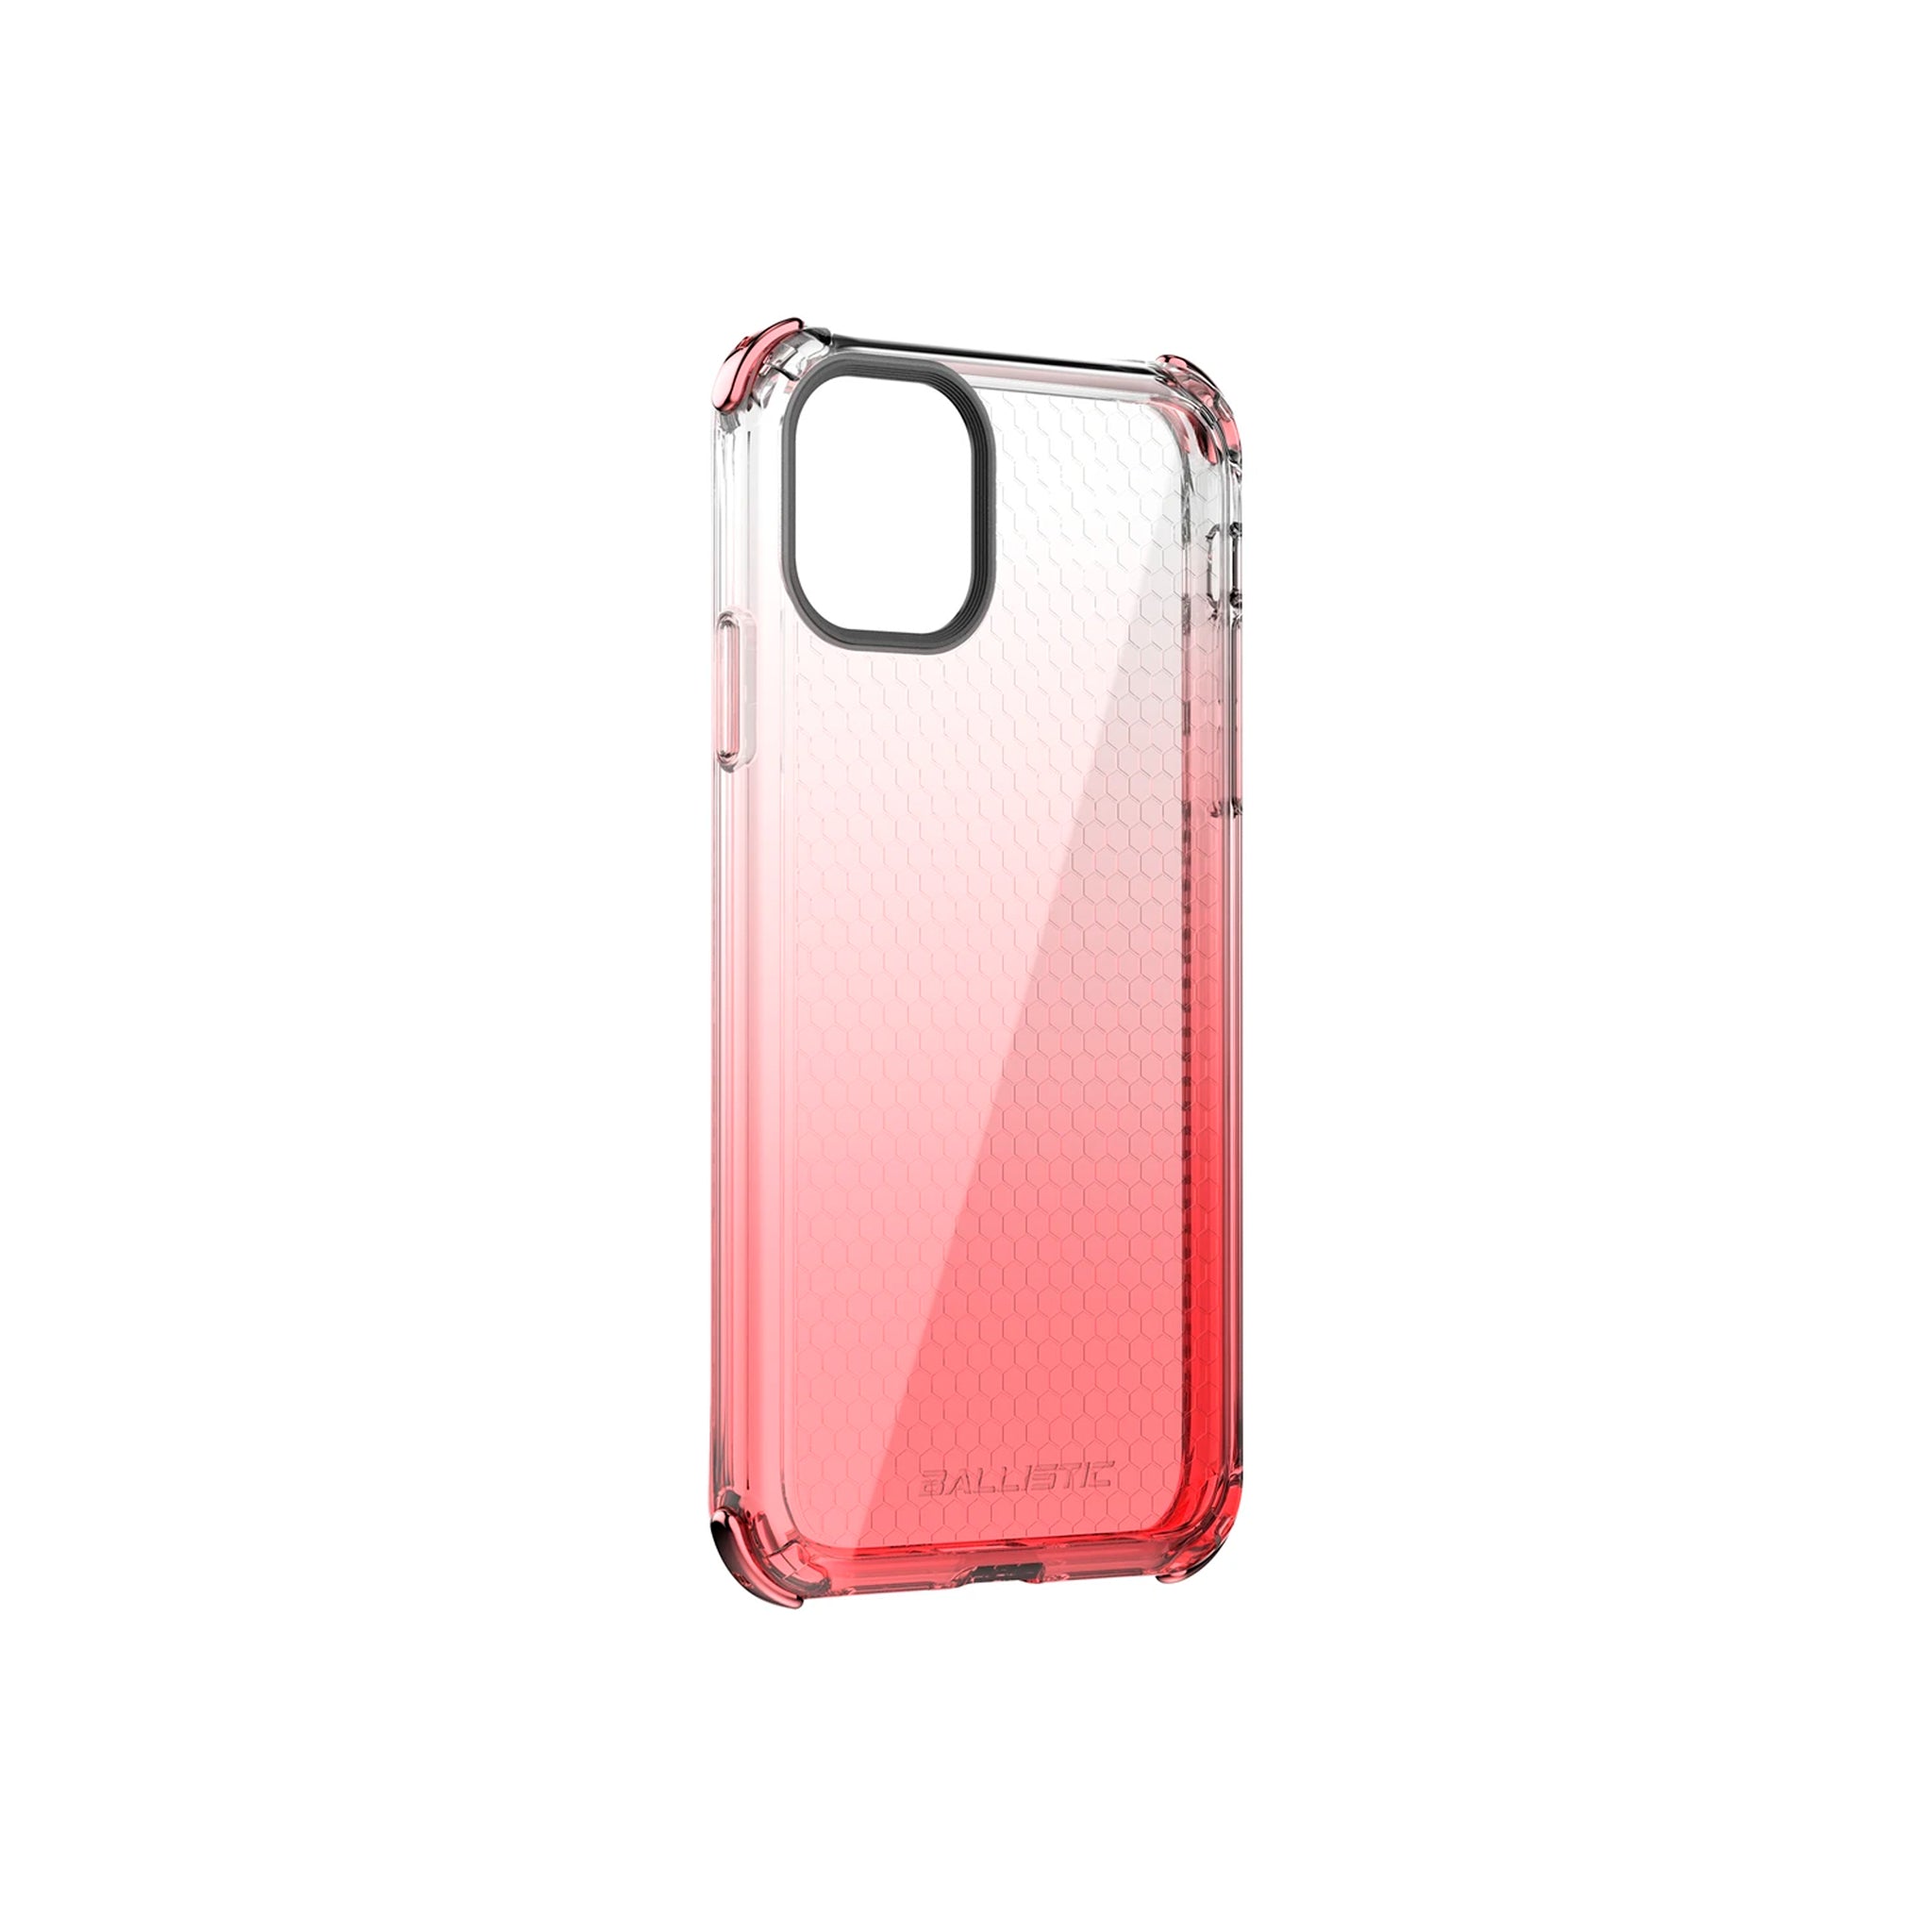 Ballistic - Jewel Spark Series For iPhone 11  - Rose Gold